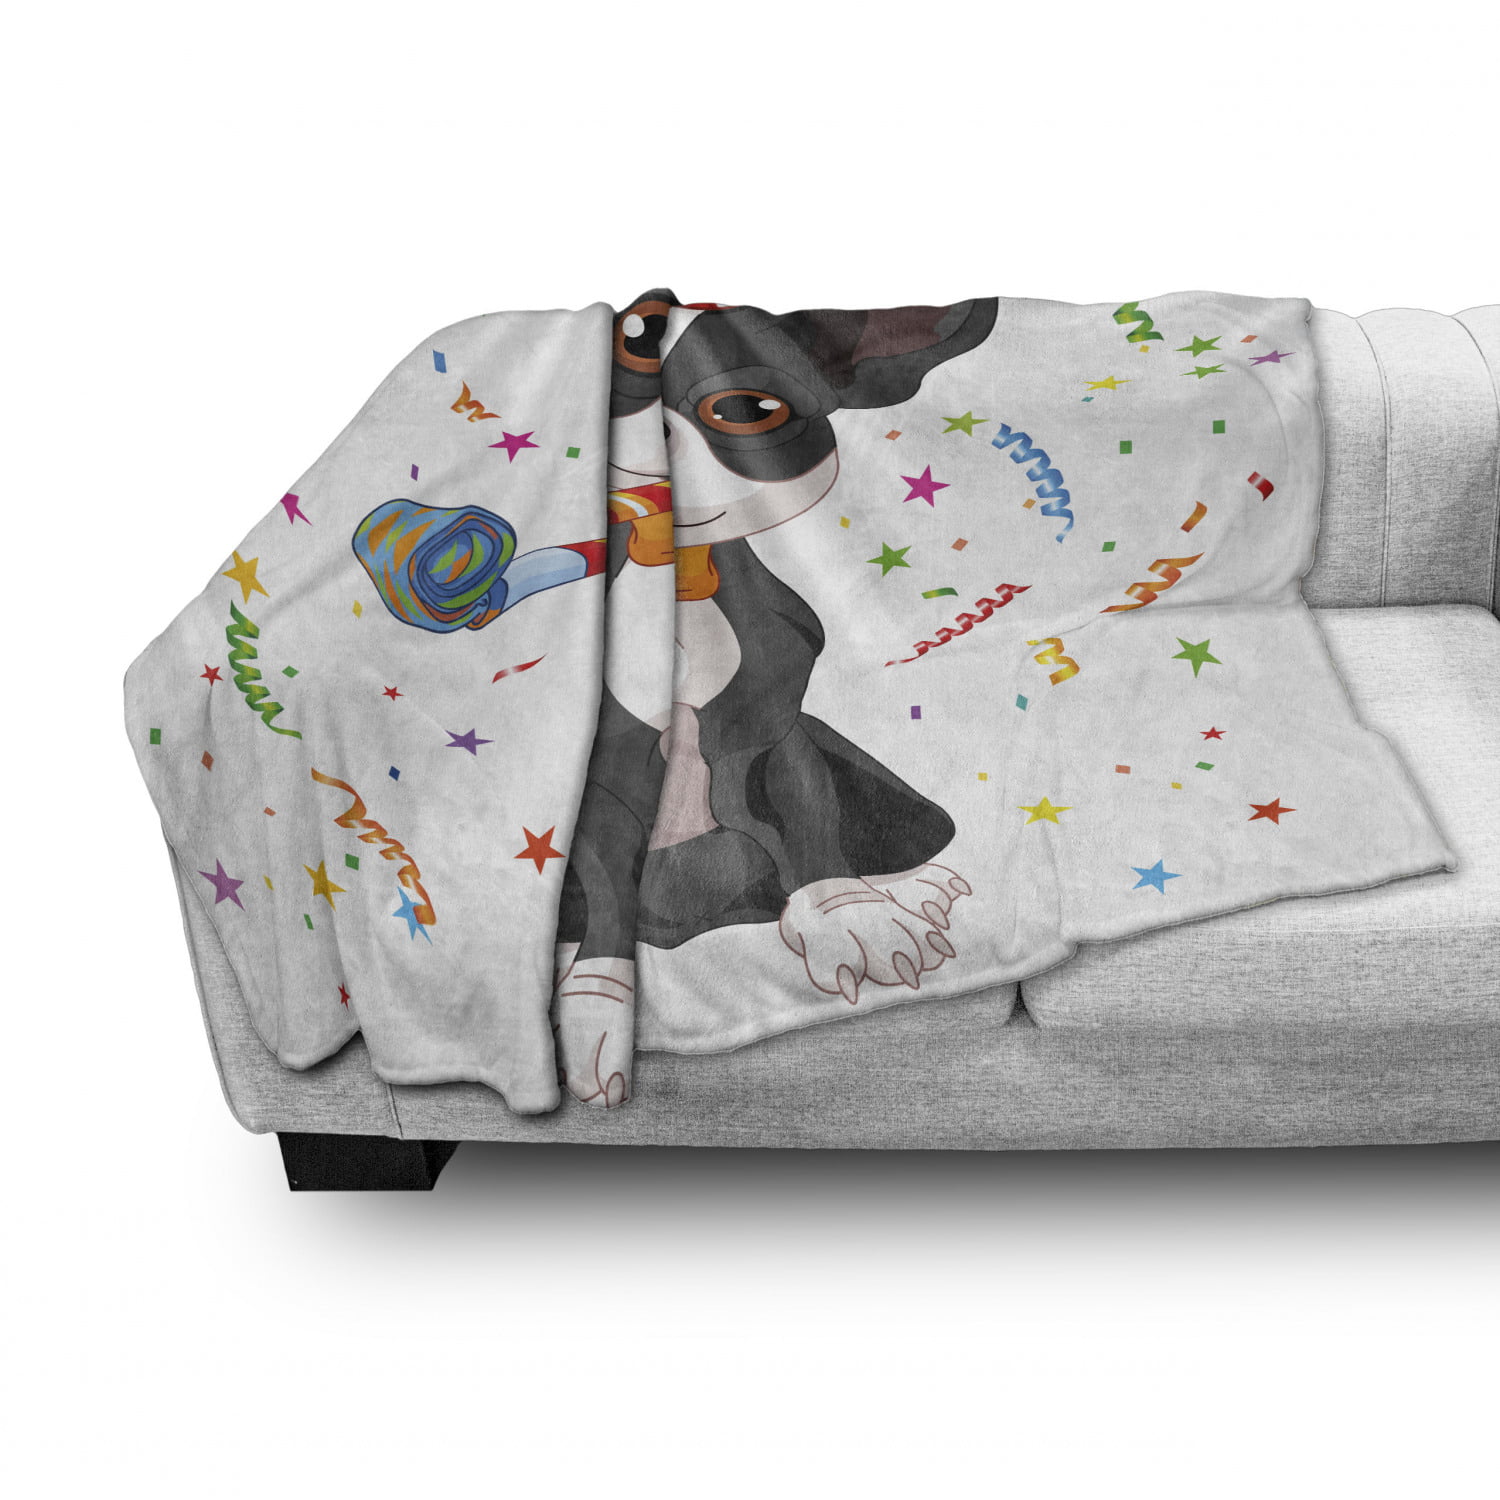 Ambesonne Boston Terrier Soft Flannel Fleece Throw Blanket Party Puppy Celebrating His Birthday on Colorful Stary Background Multicolor Cozy Plush for Indoor and Outdoor Use 60 x 80 